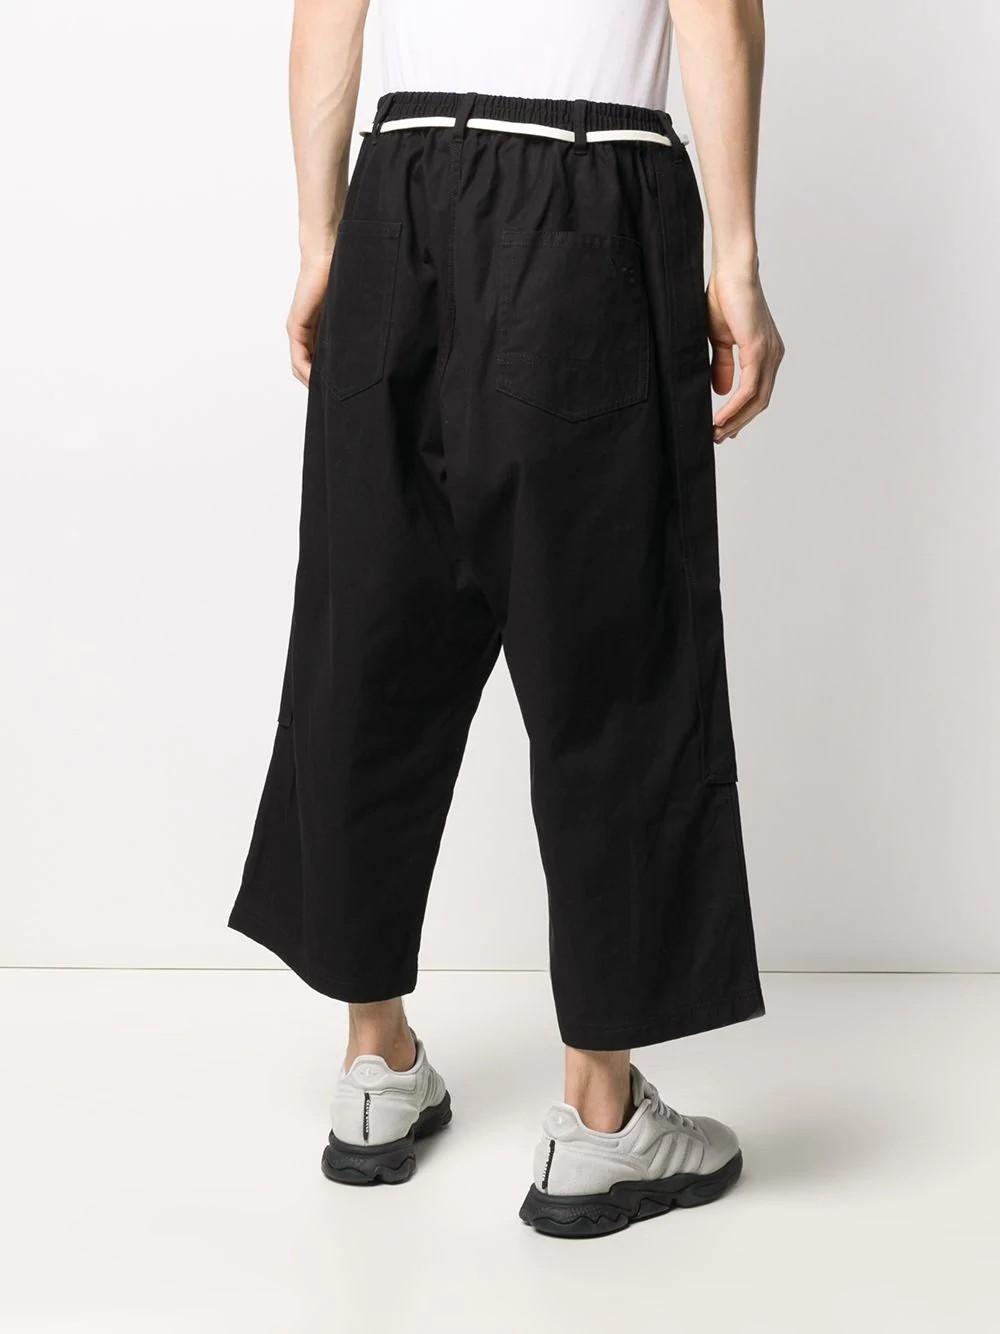 Canvas Workwear Cropped Pants FP8678 - 3